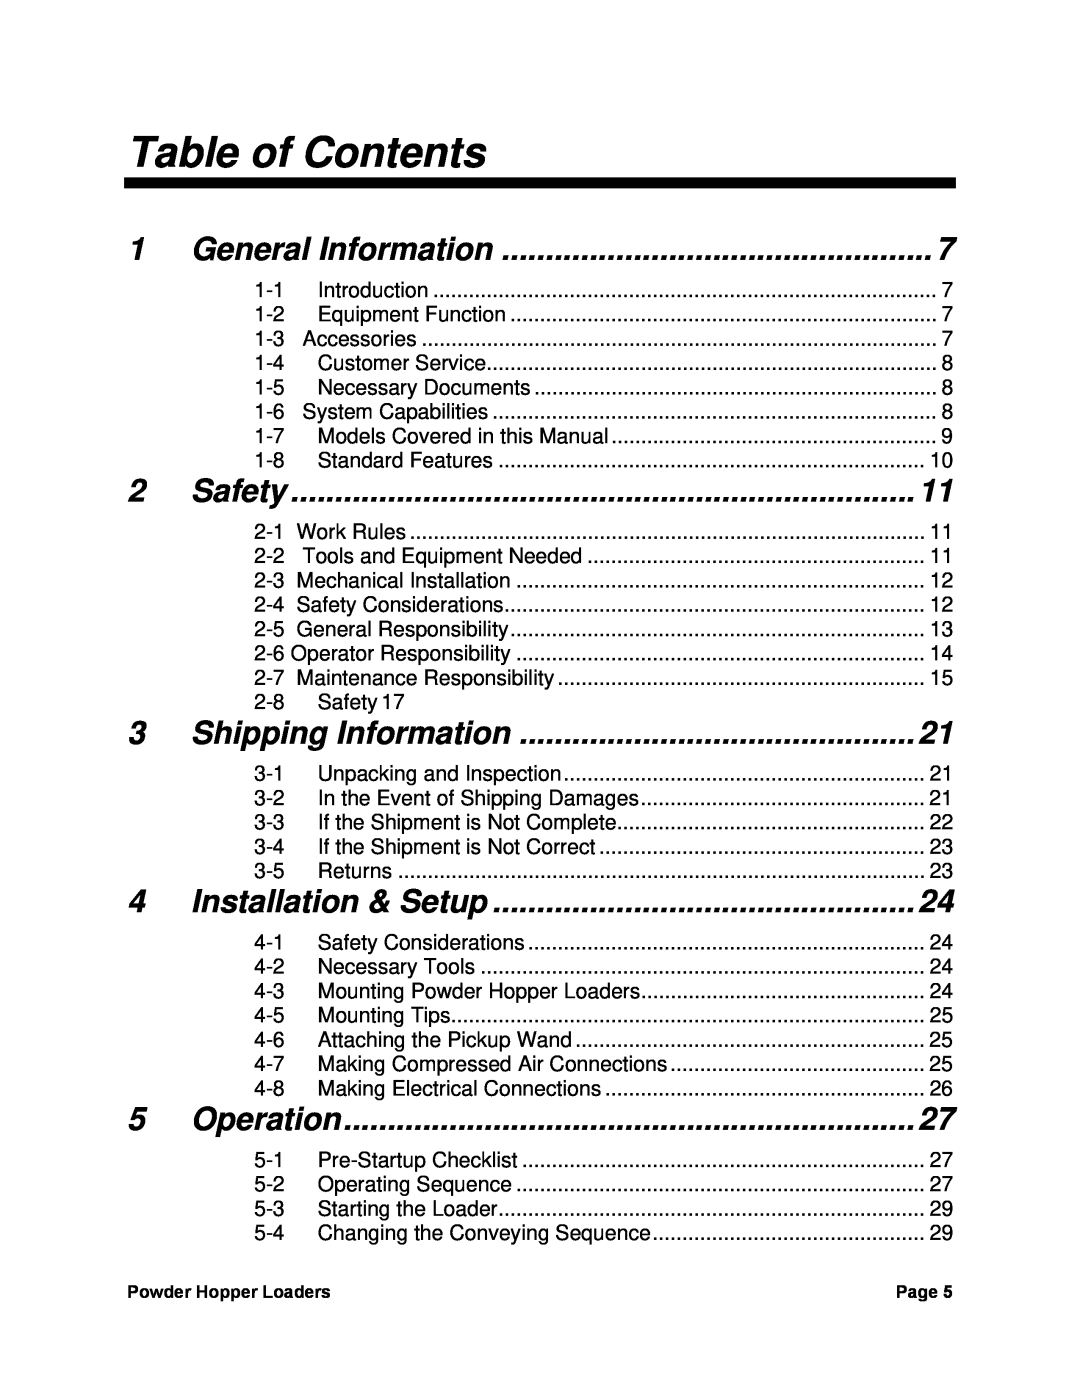 Sterling 238, 882, 0 Table of Contents, General Information, Shipping Information, Installation & Setup, Operation, Safety 